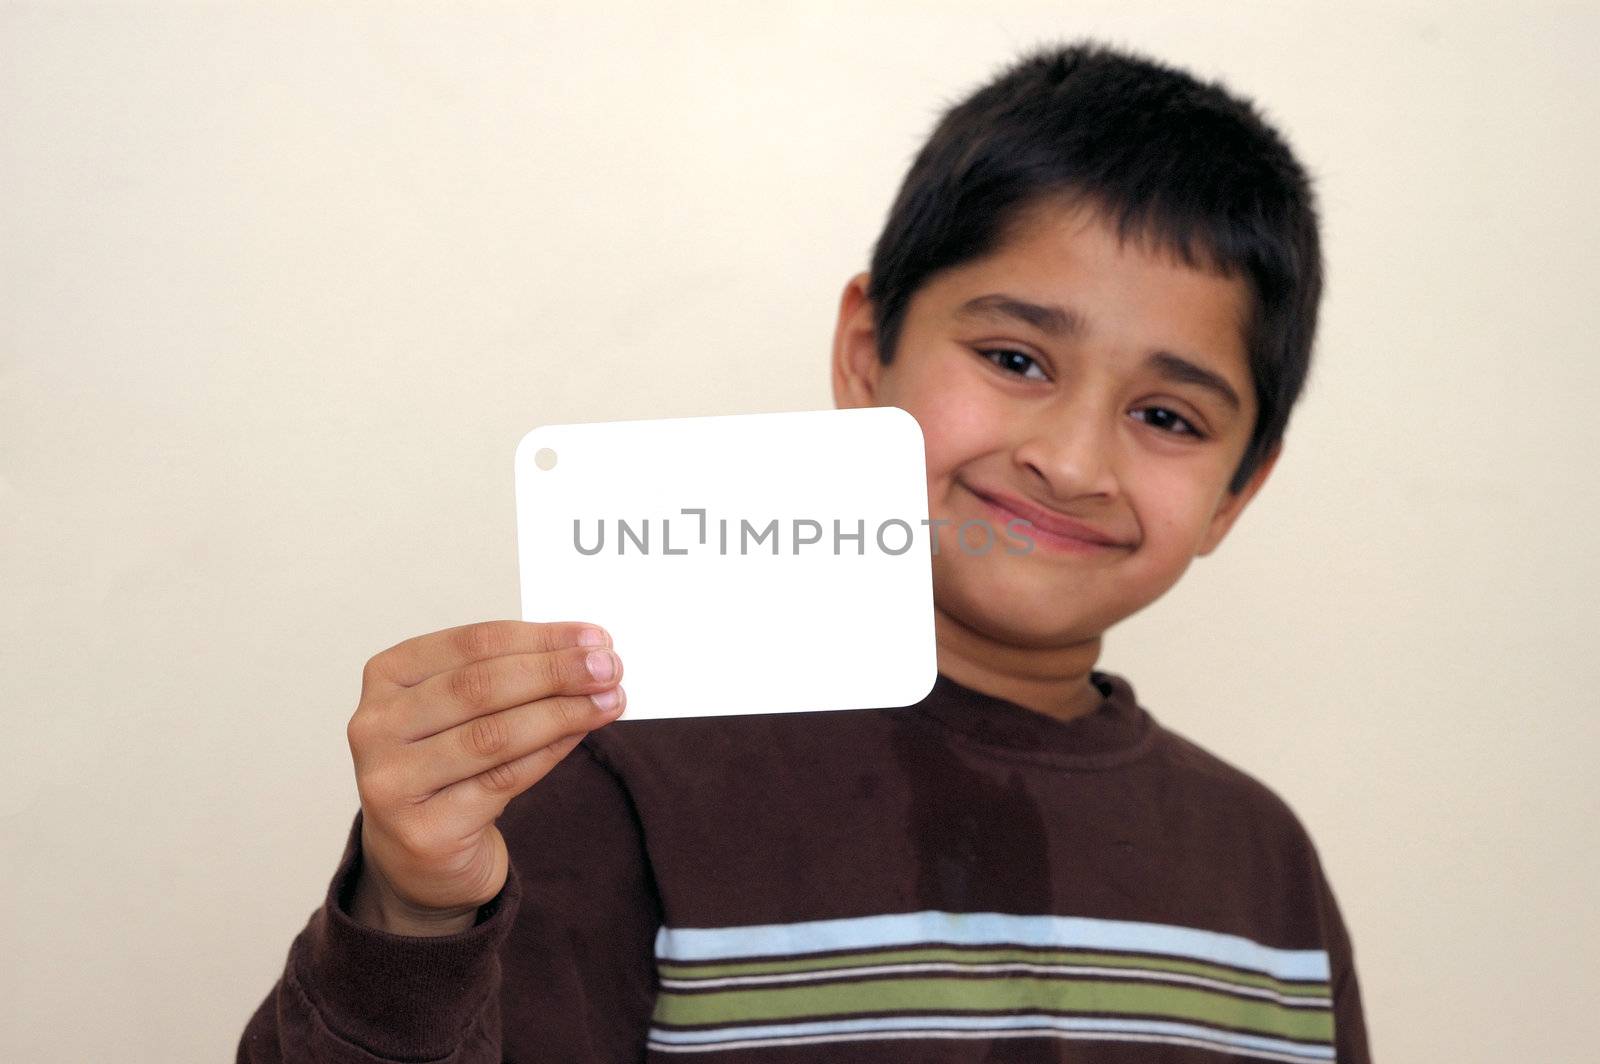 An handsome Indian kid holding a signboard